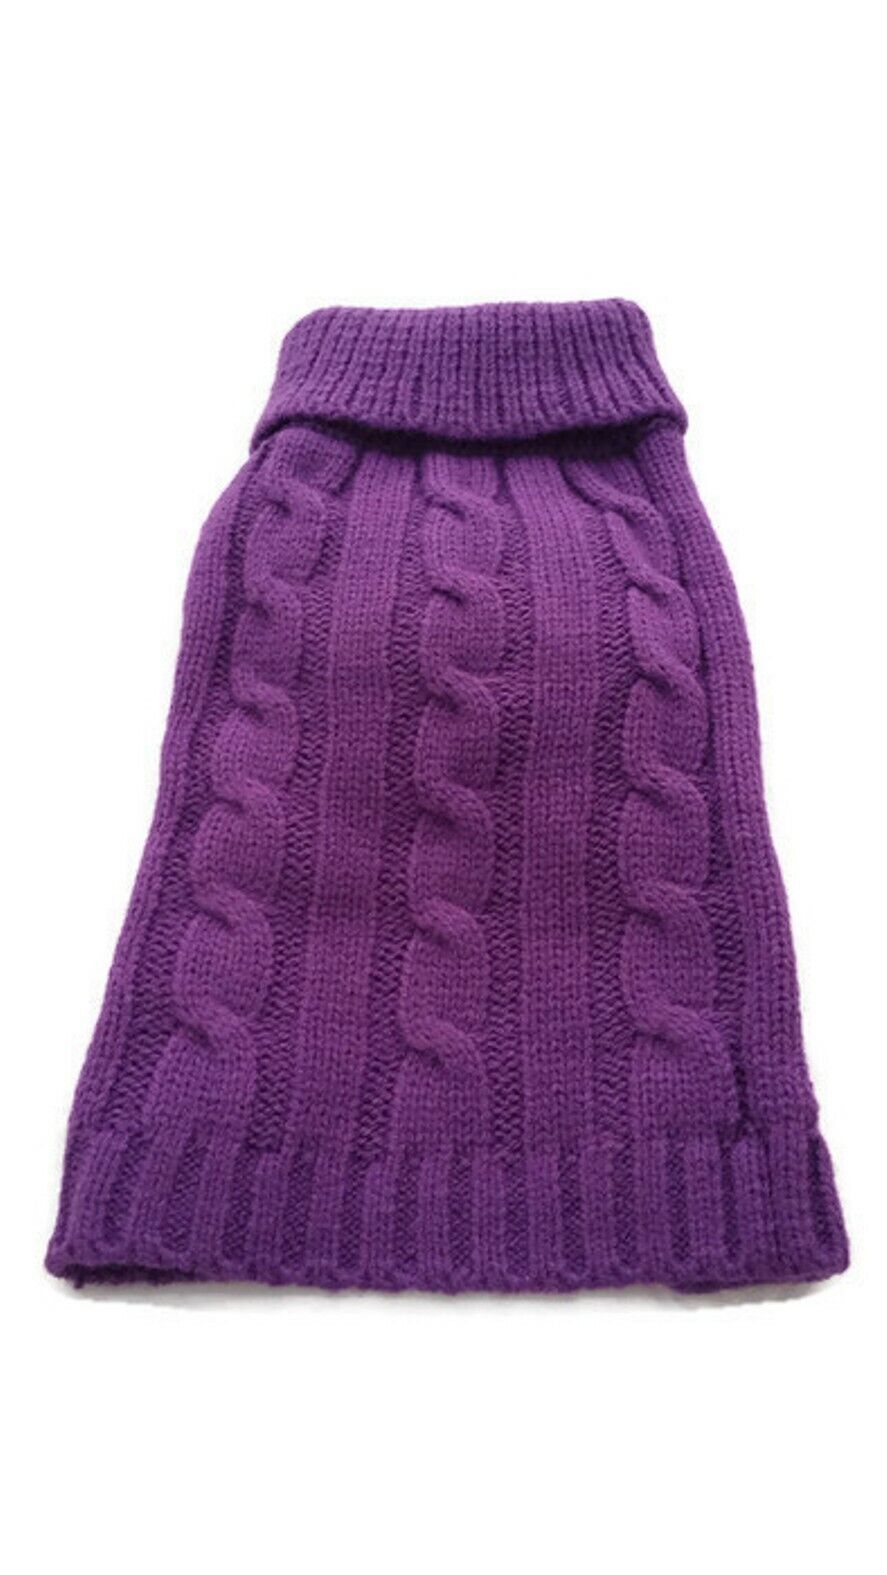 Le Petit Chien Brand Small Dog Sweater Puppy Clothing Pet Supply